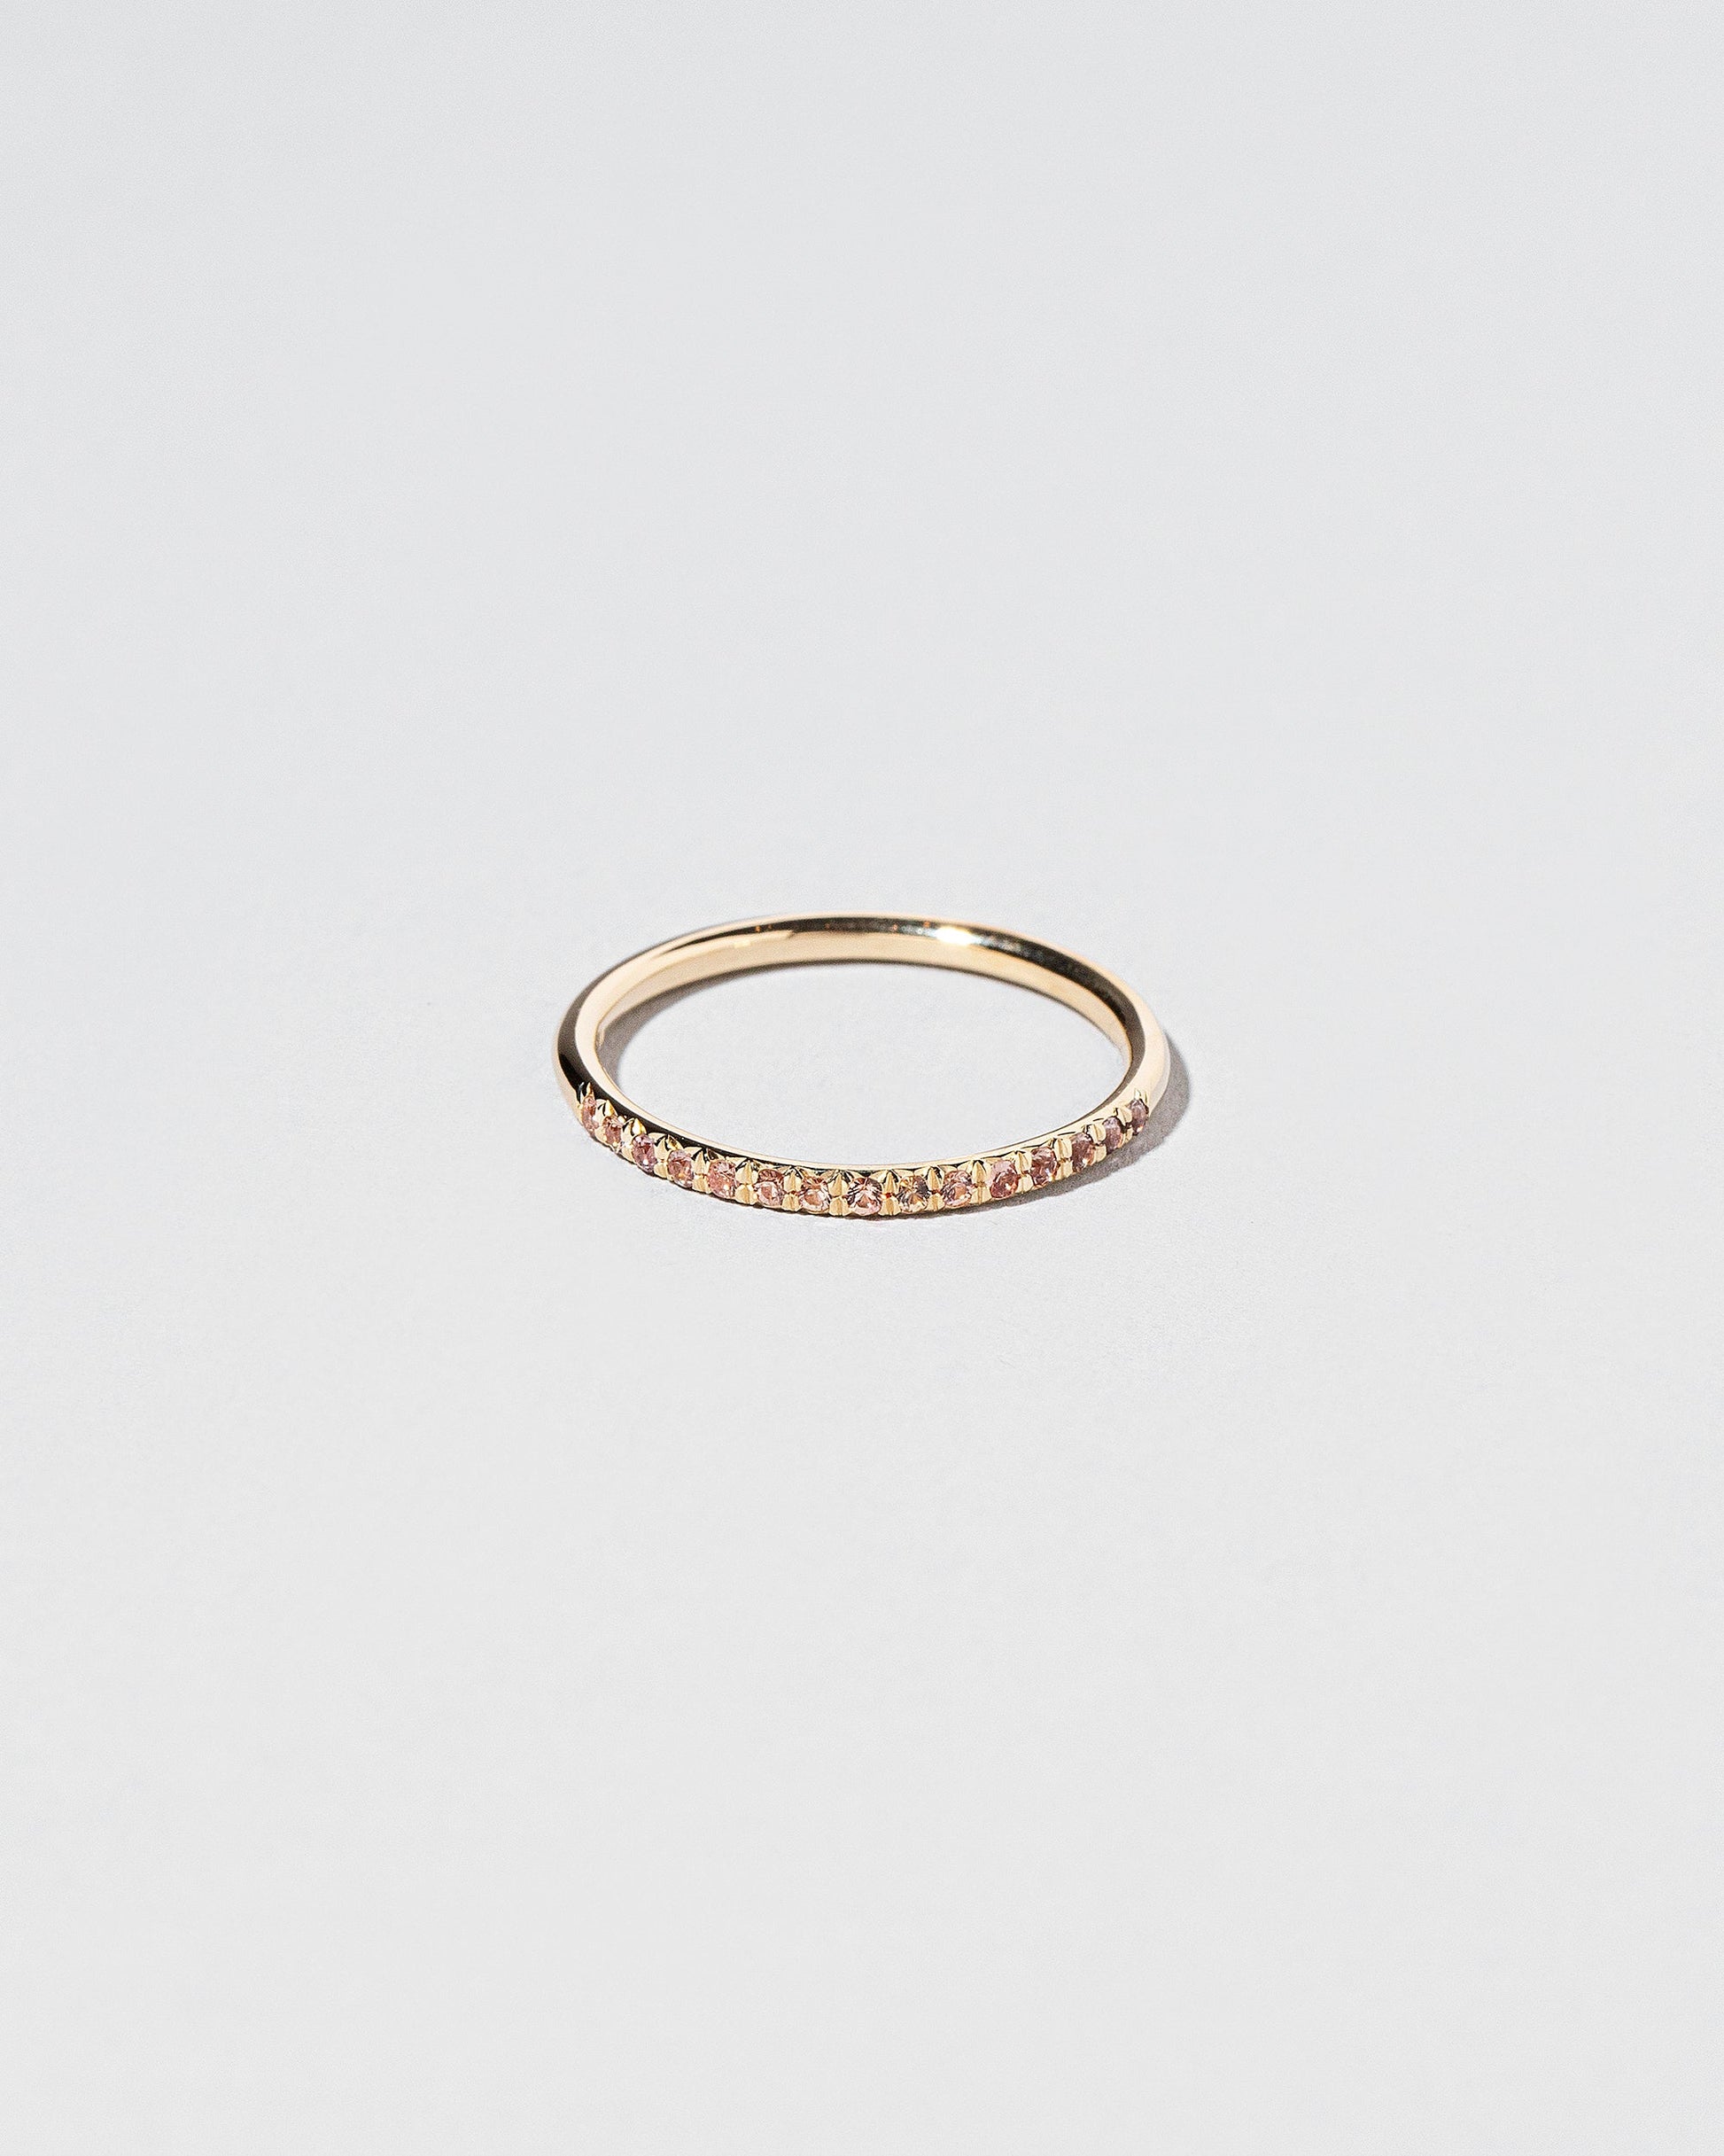 Gold Peach Malawi Sapphire Fifteen Stone Dot Band on light color background.